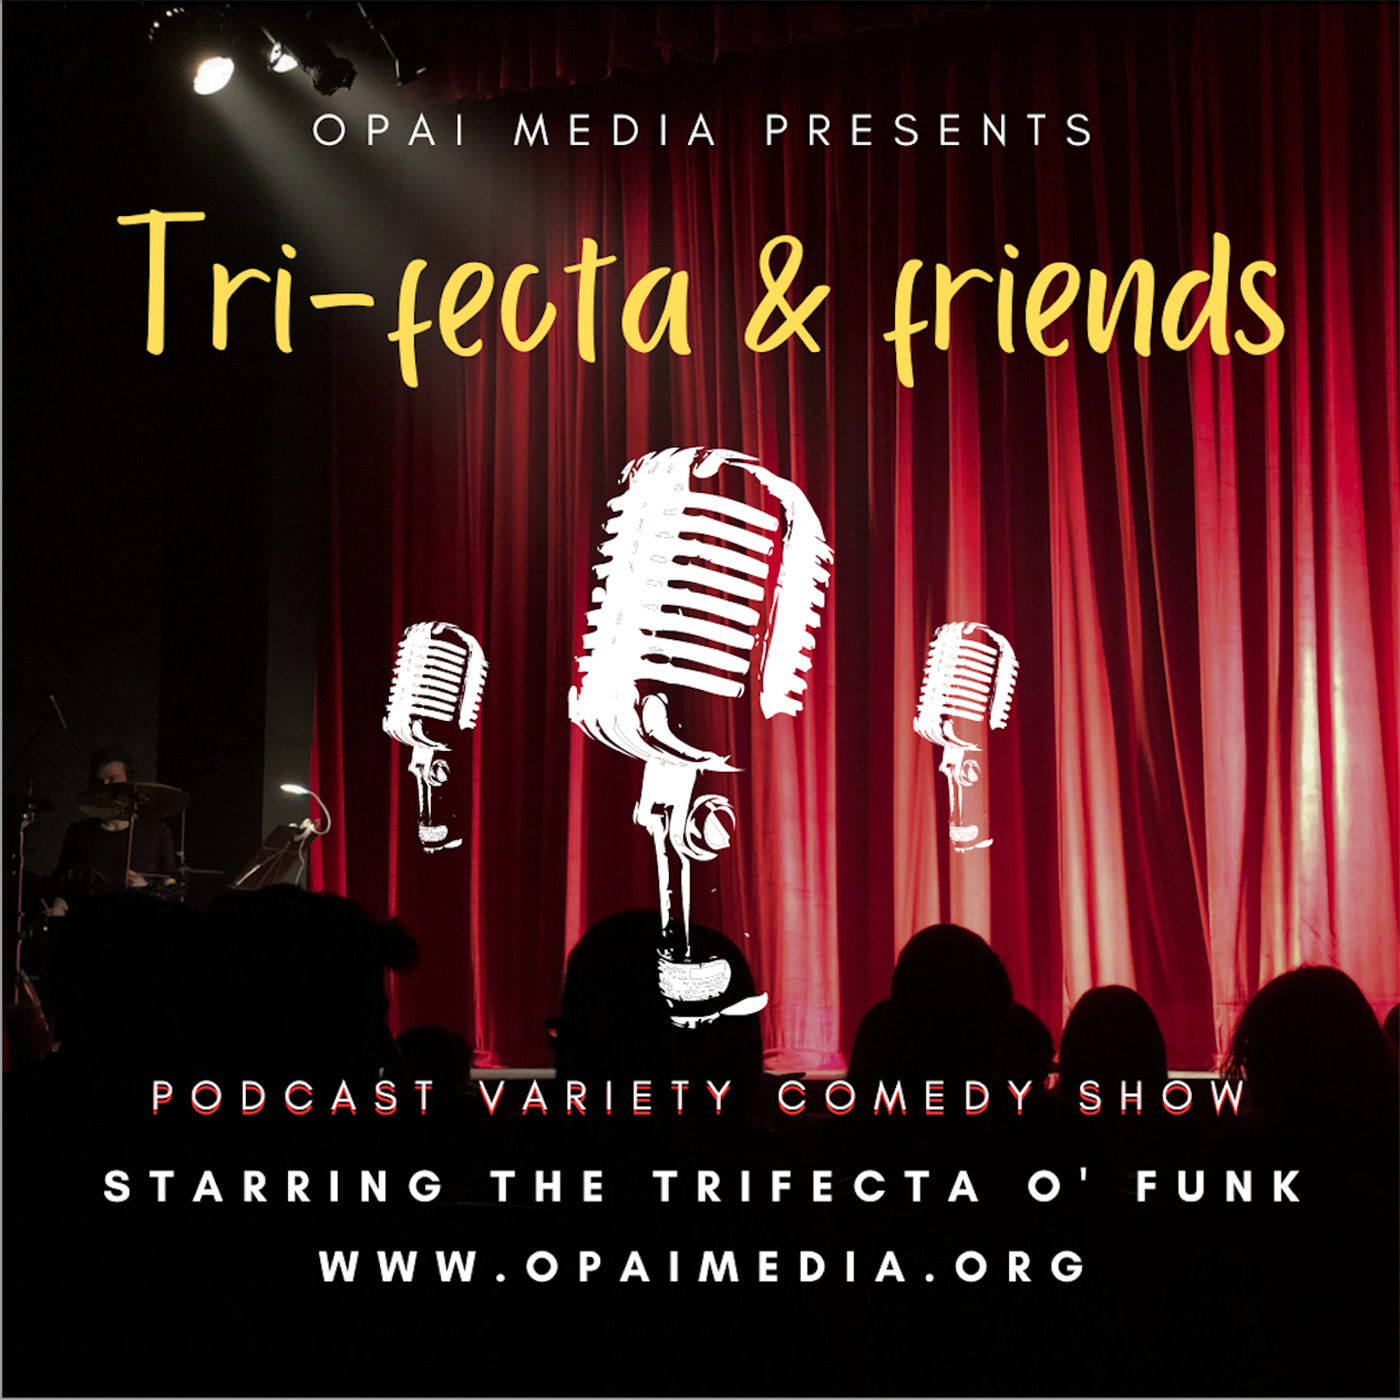 Artwork for The Trifecta & Friends Variety Comedy Show